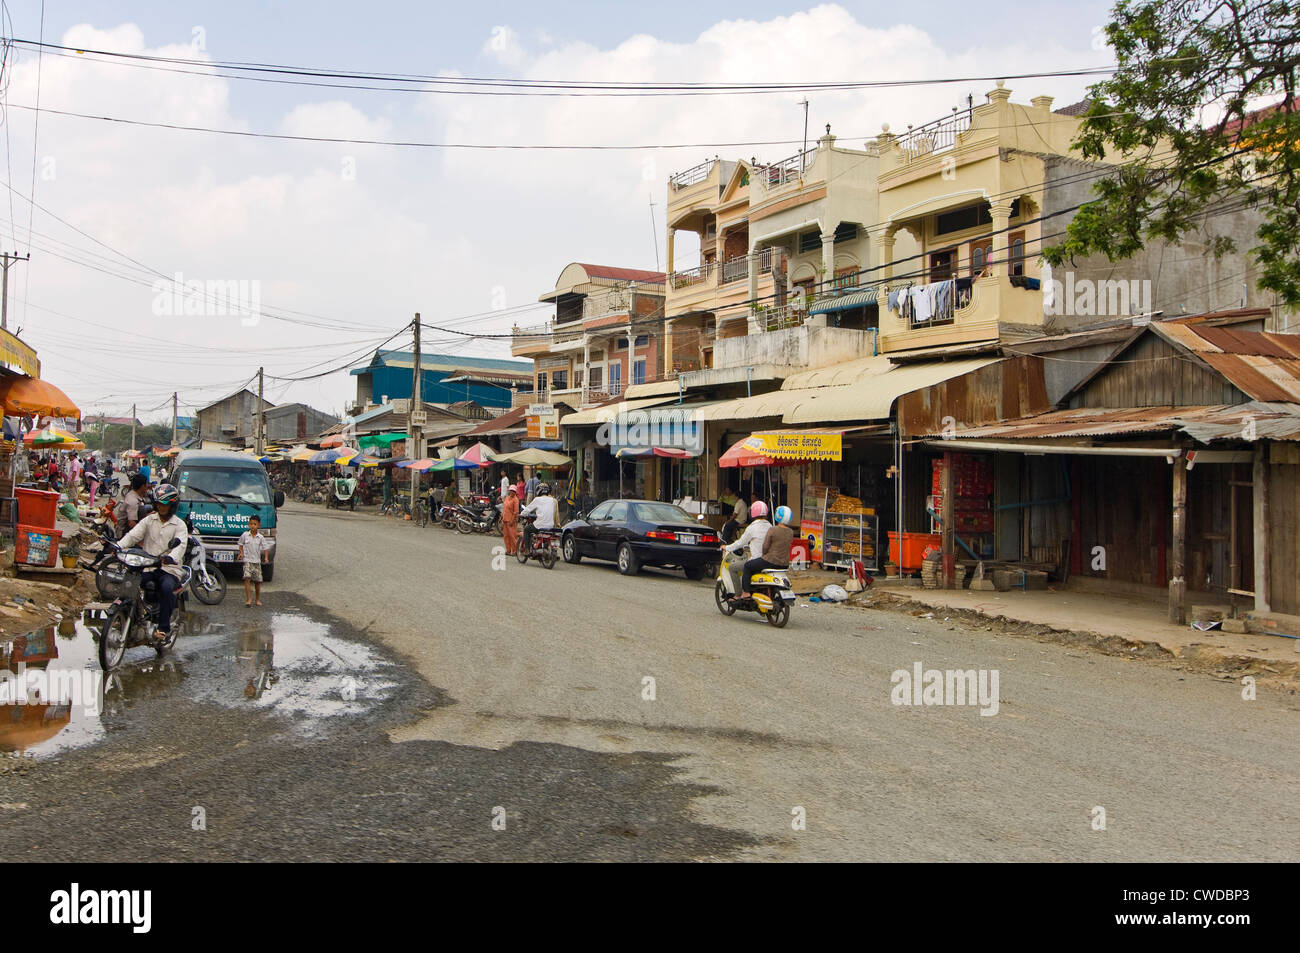 Horizontal view of a typical streetscene with market stalls lining the street in Phnom Penh, Cambodia Stock Photo